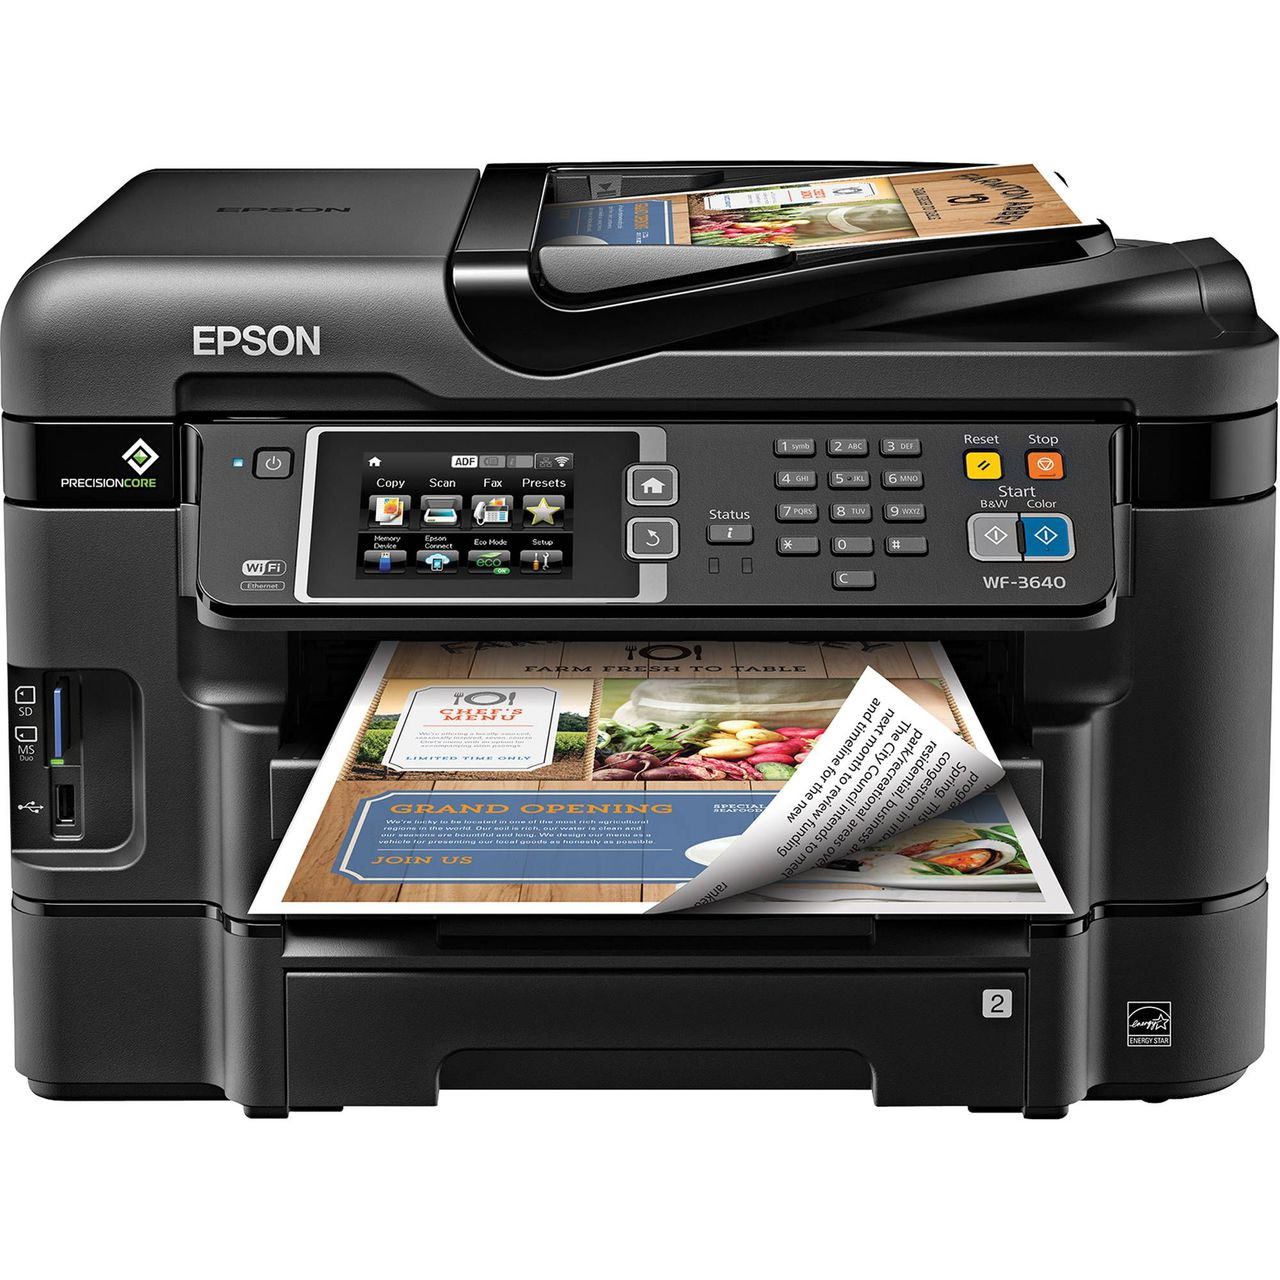 Epson Workforce Wf 2650 All In One Wireless Color Printer With Scanner Copier And Fax 3919